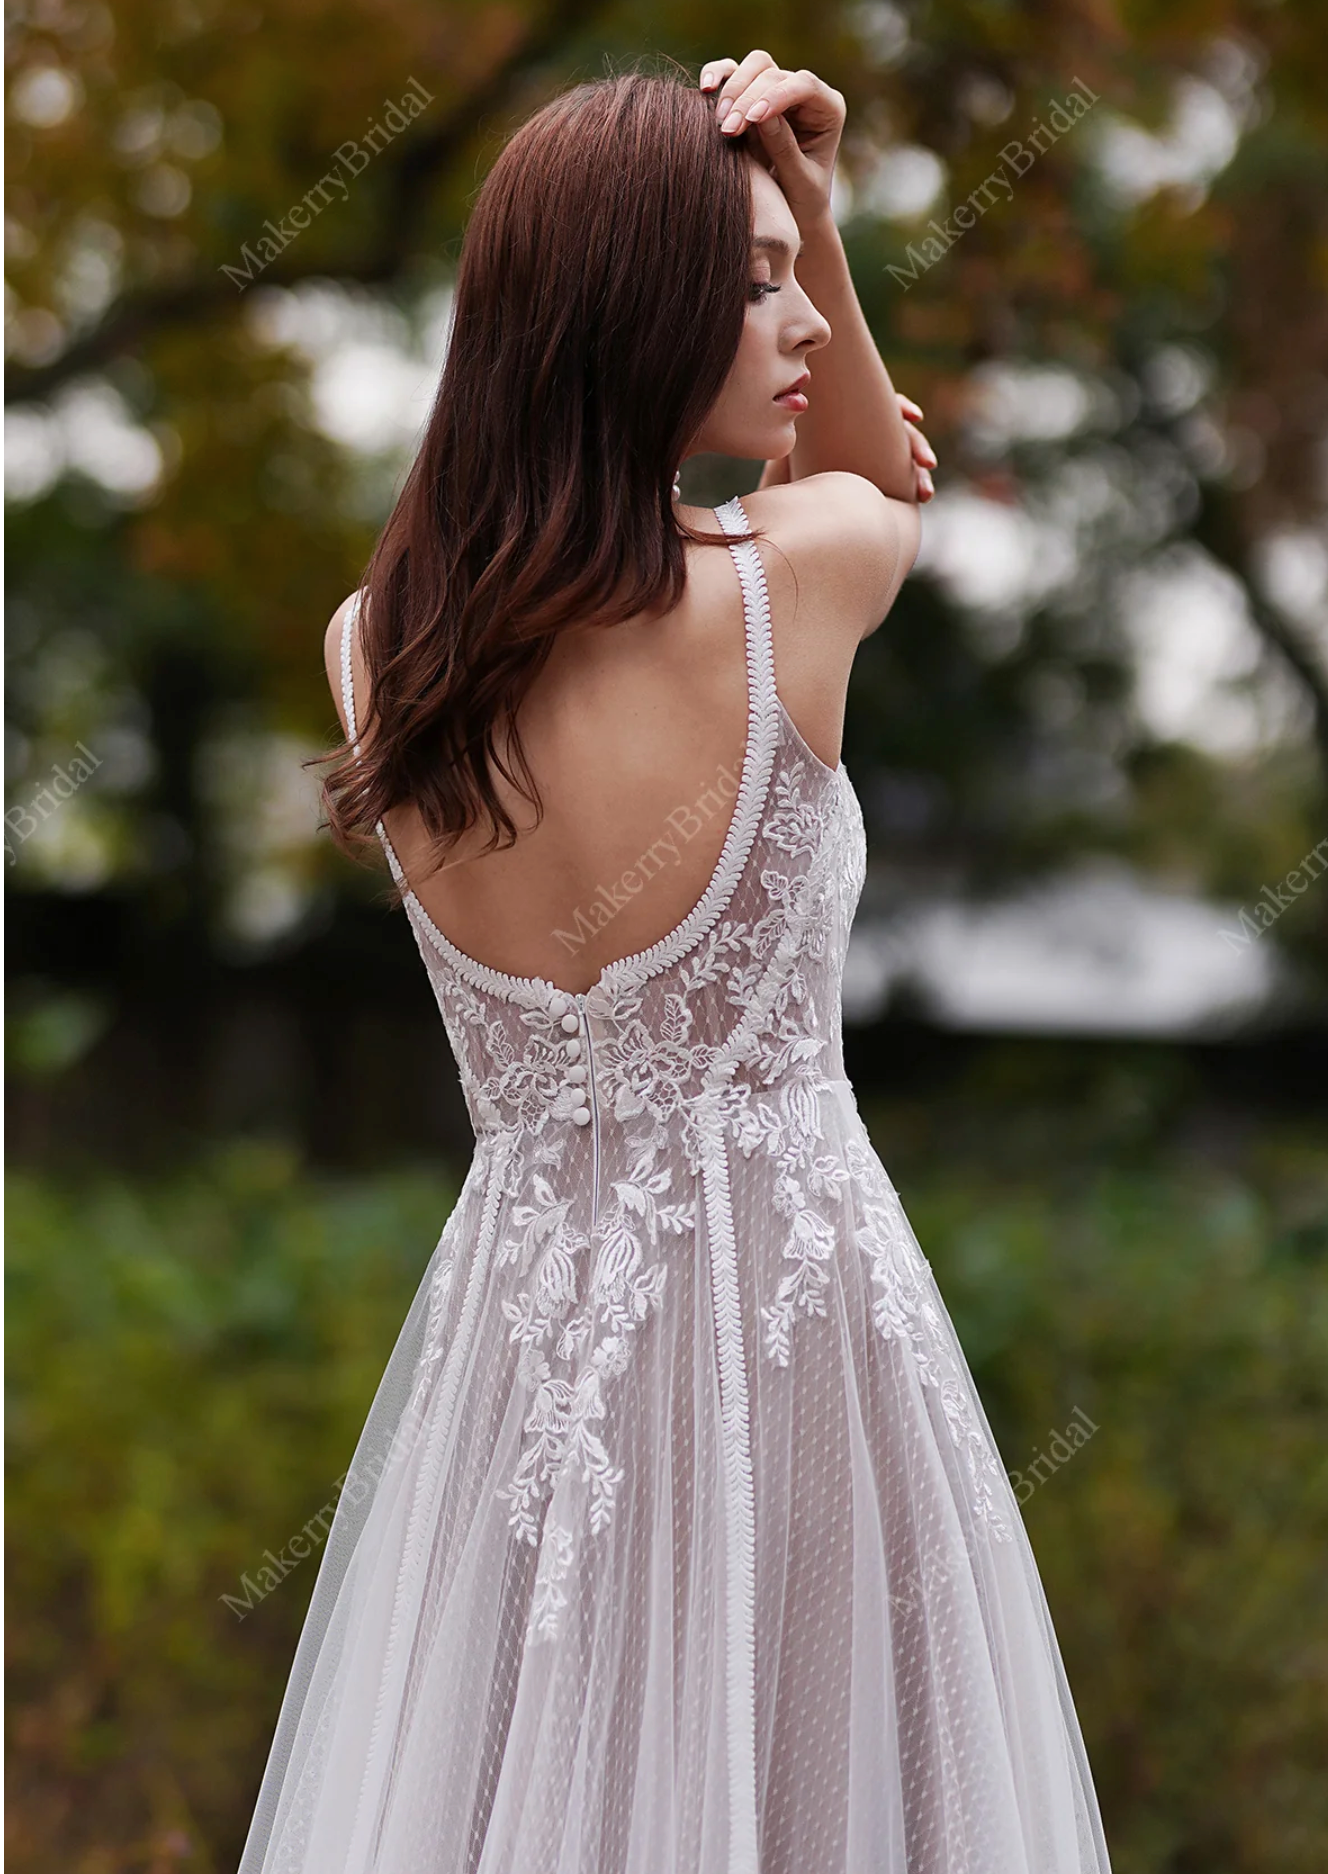 Load image into Gallery viewer, Bohemian Lace And Floral Wedding Dress
